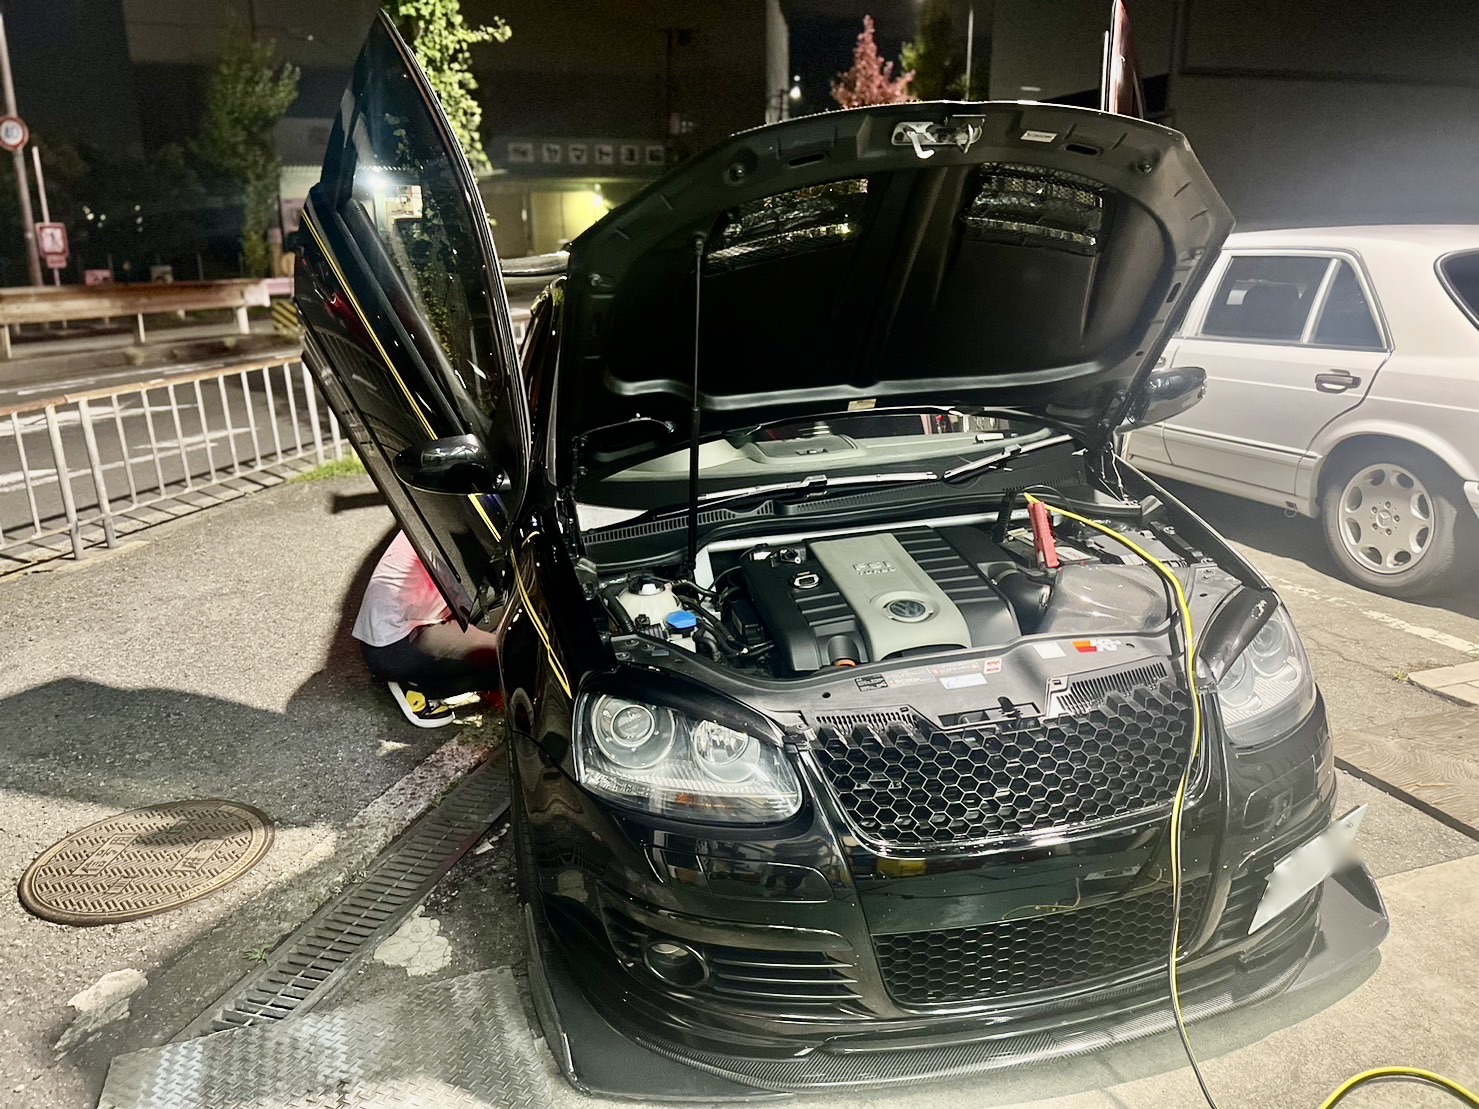 Volkswagen Golf GTI5 bubbling installation (ECU tuned by another company) World Motor Hattori mbFAST Tuning